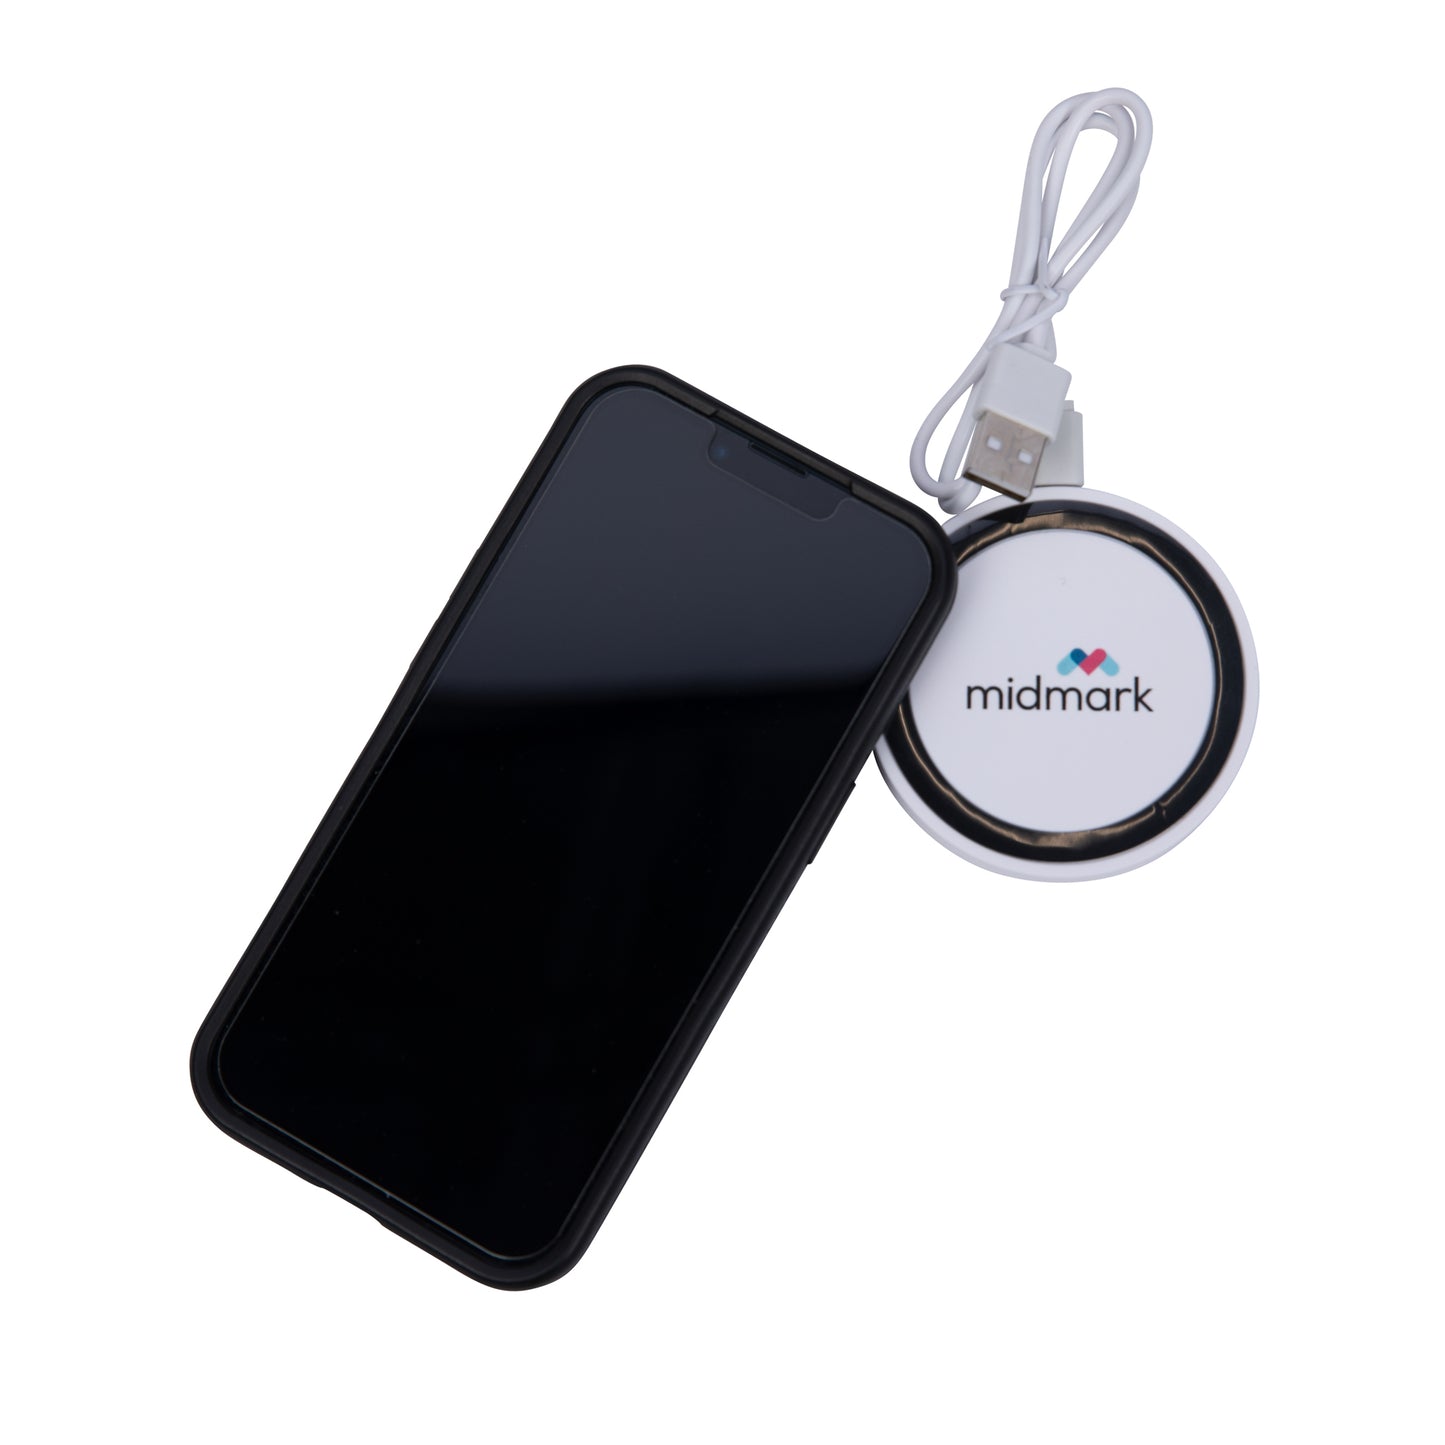 Midmark Branded Oasis Wireless Charger